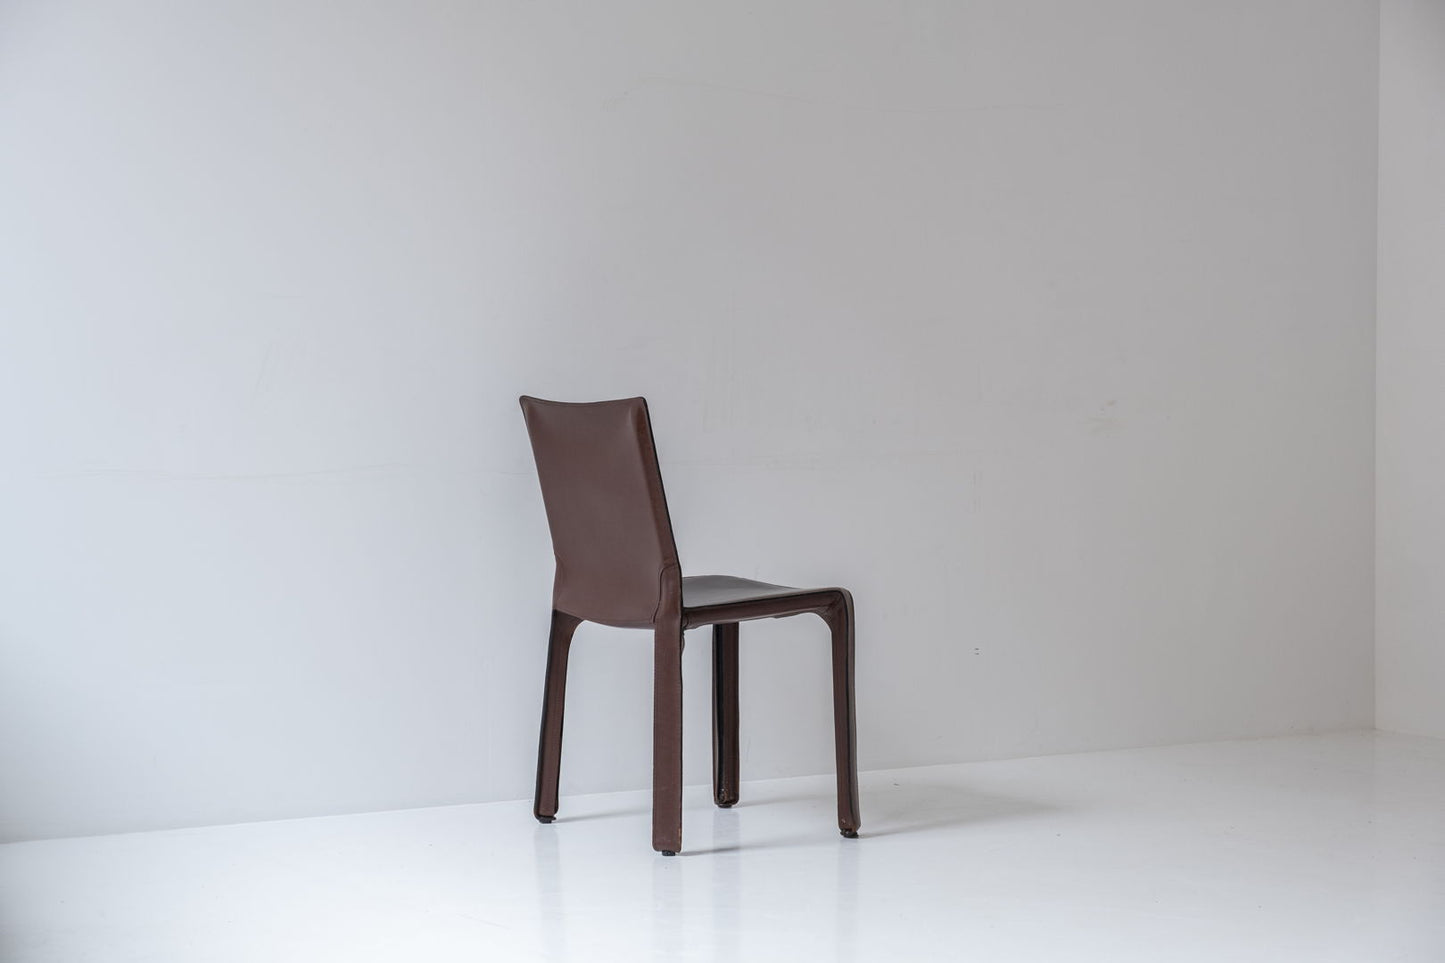 Set of four ‘413’ CAB dining chairs by Mario Bellini for Cassina, Italy 1977.